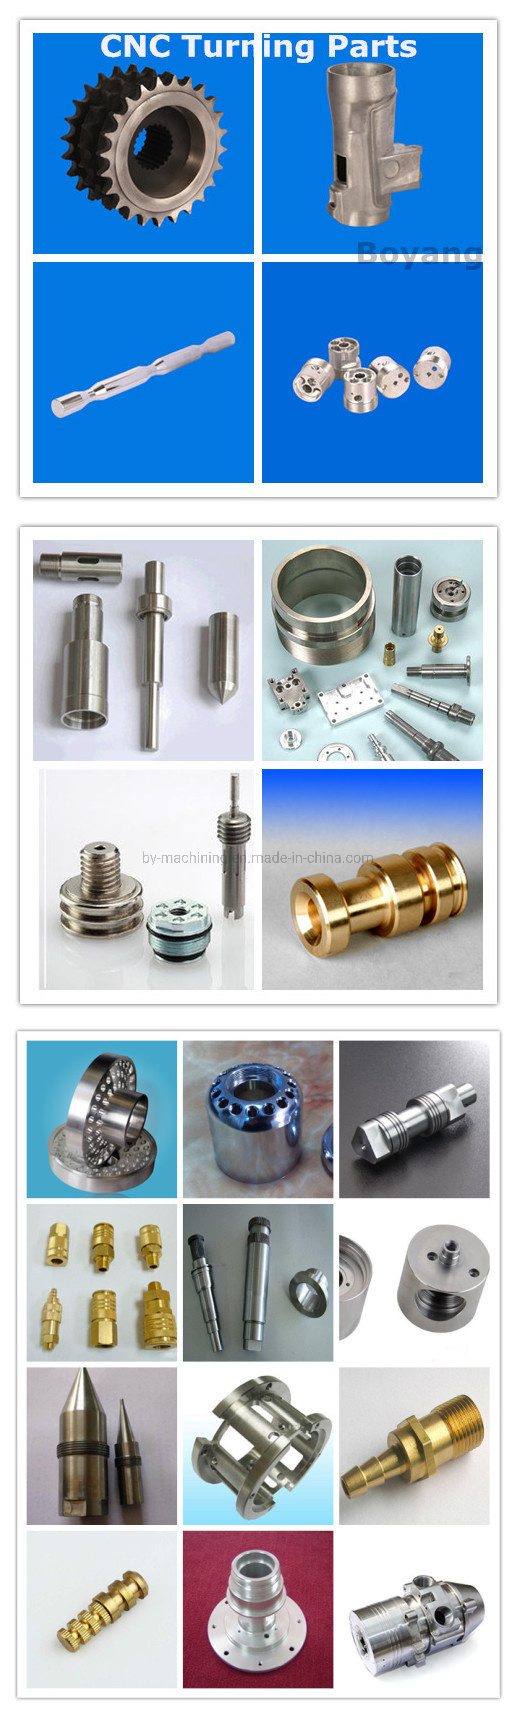 High Precision CNC Machining Parts with Fast Delivery Service